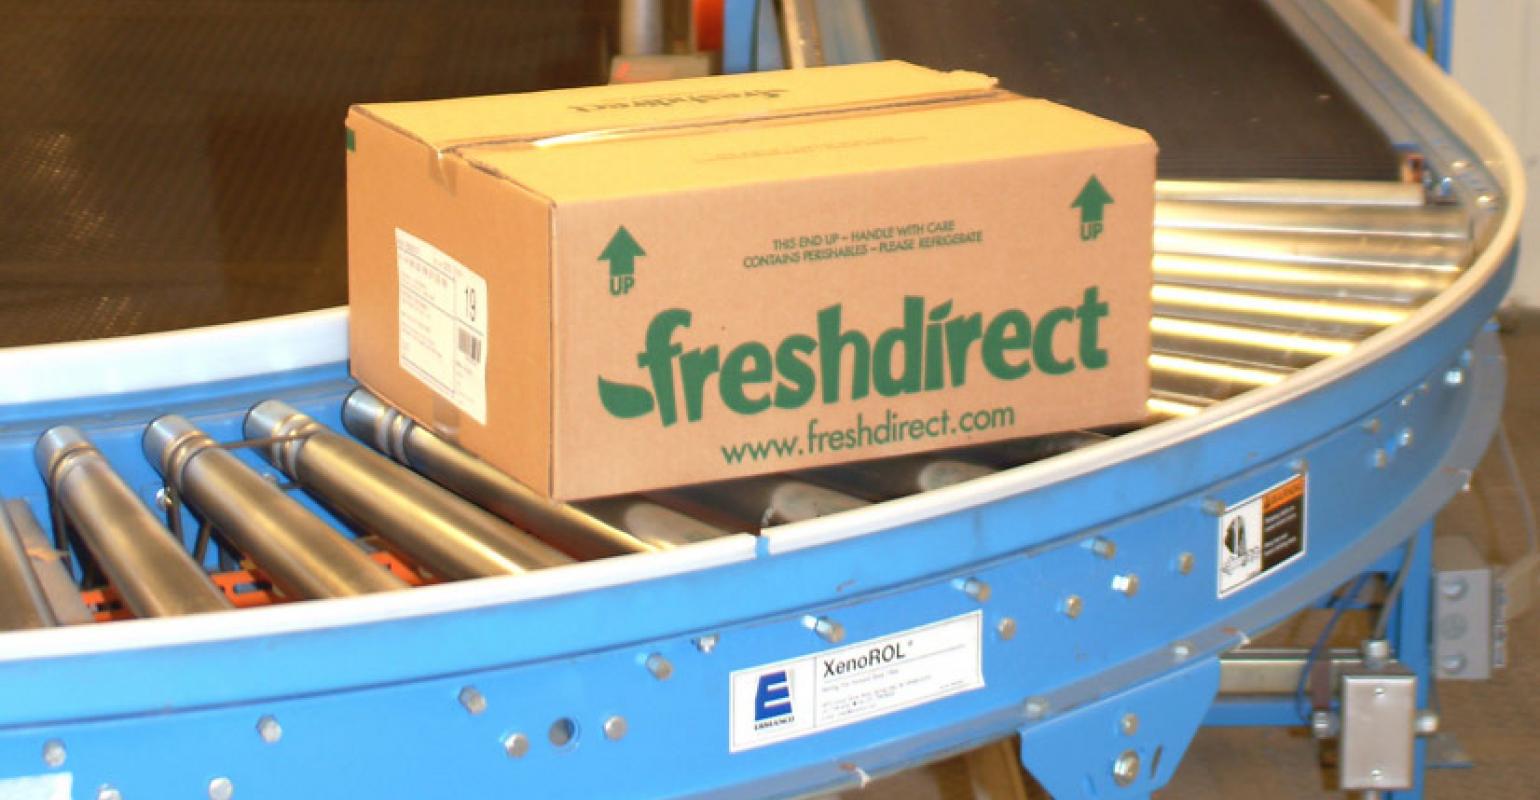 Interested in Becoming a FreshDirect Bag Partner?